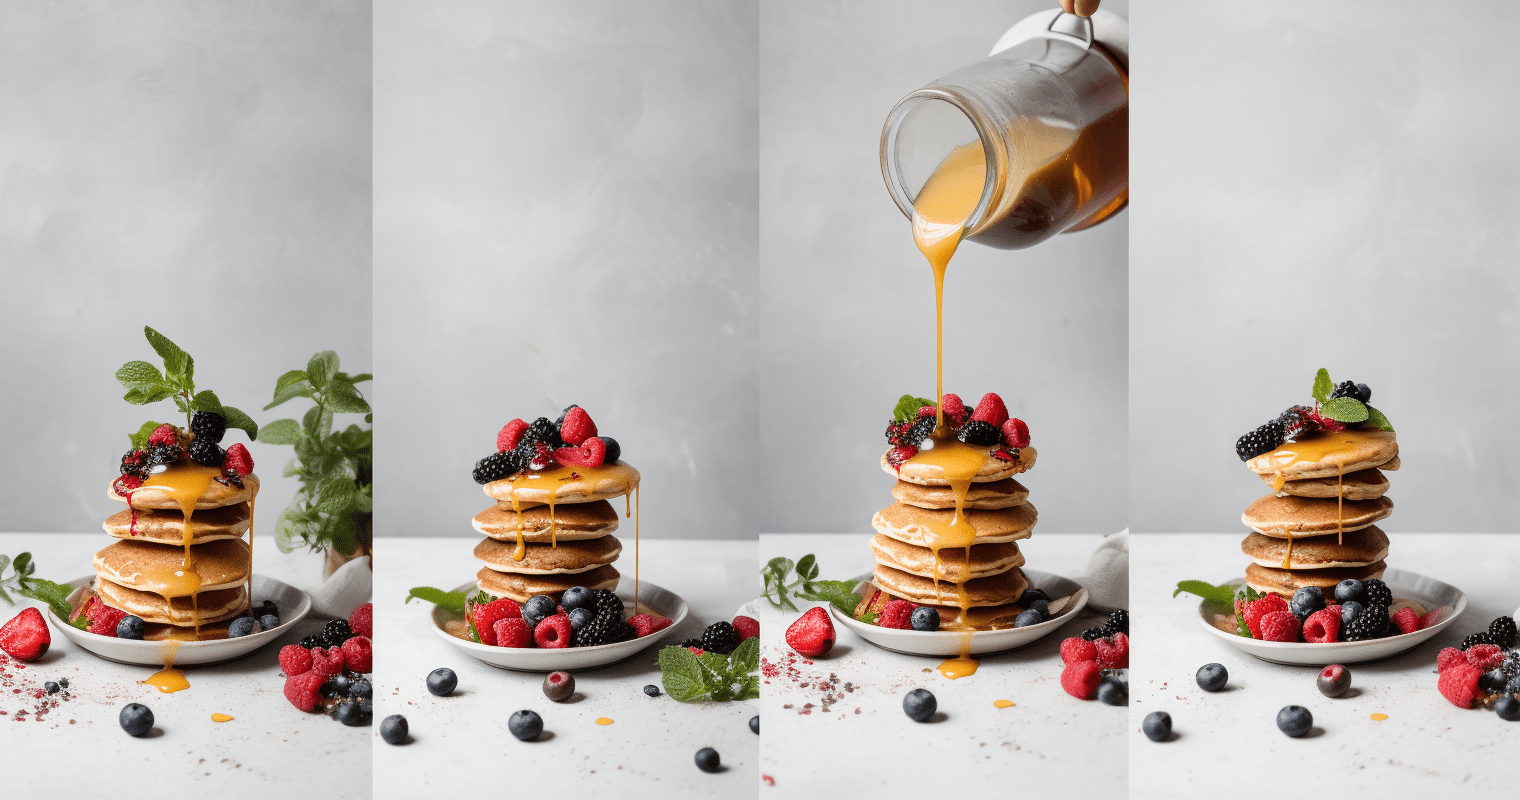 Indulge in Fluffy Vegan Pancakes with this Delicious Recipe